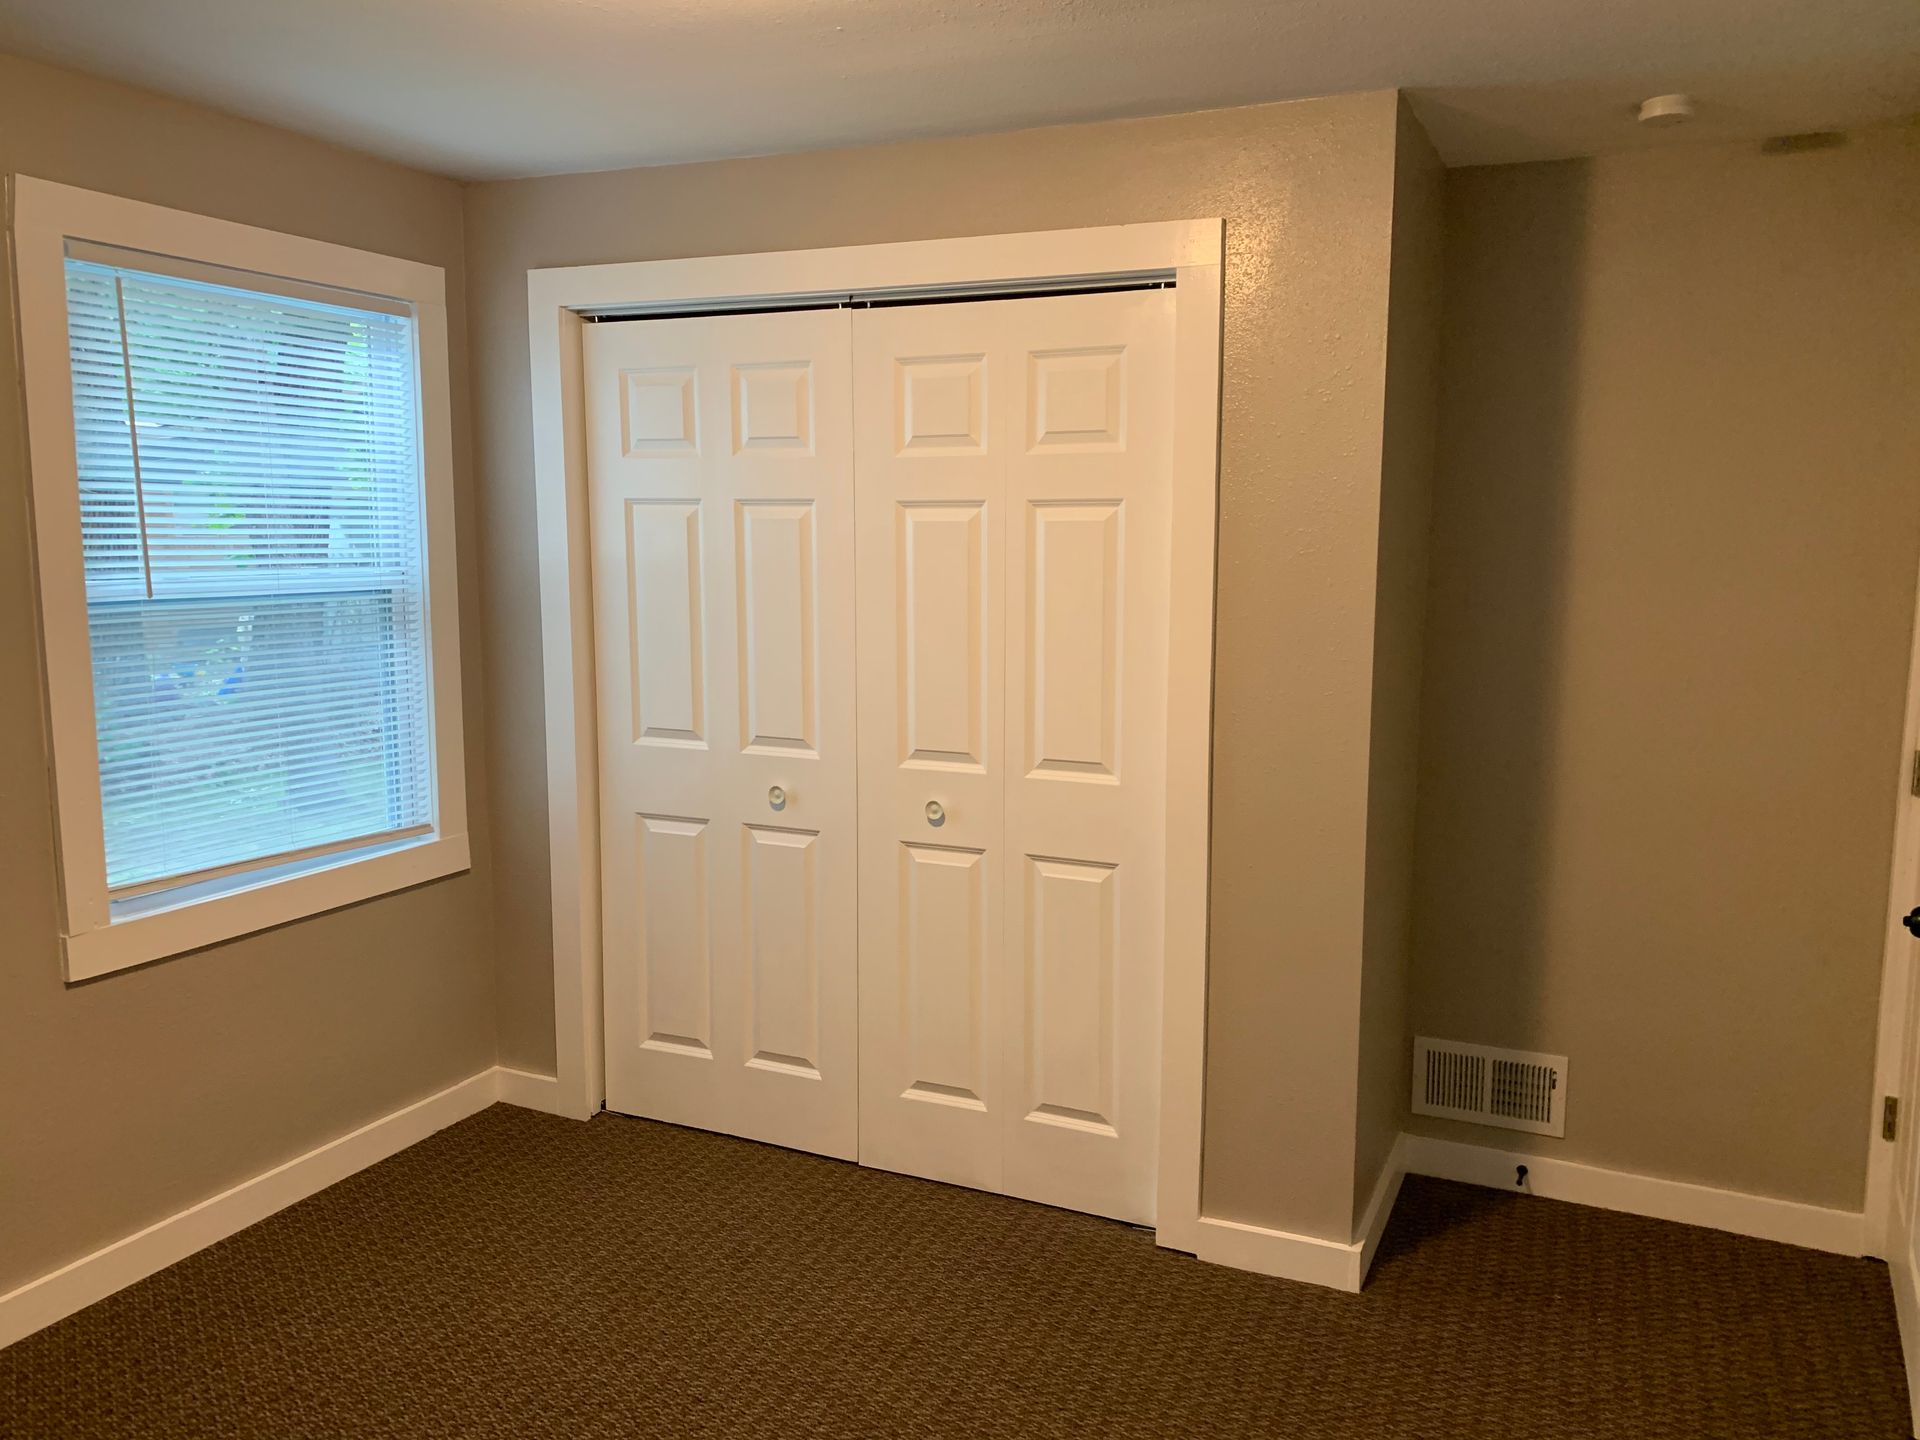 An empty room with a closet and a window.